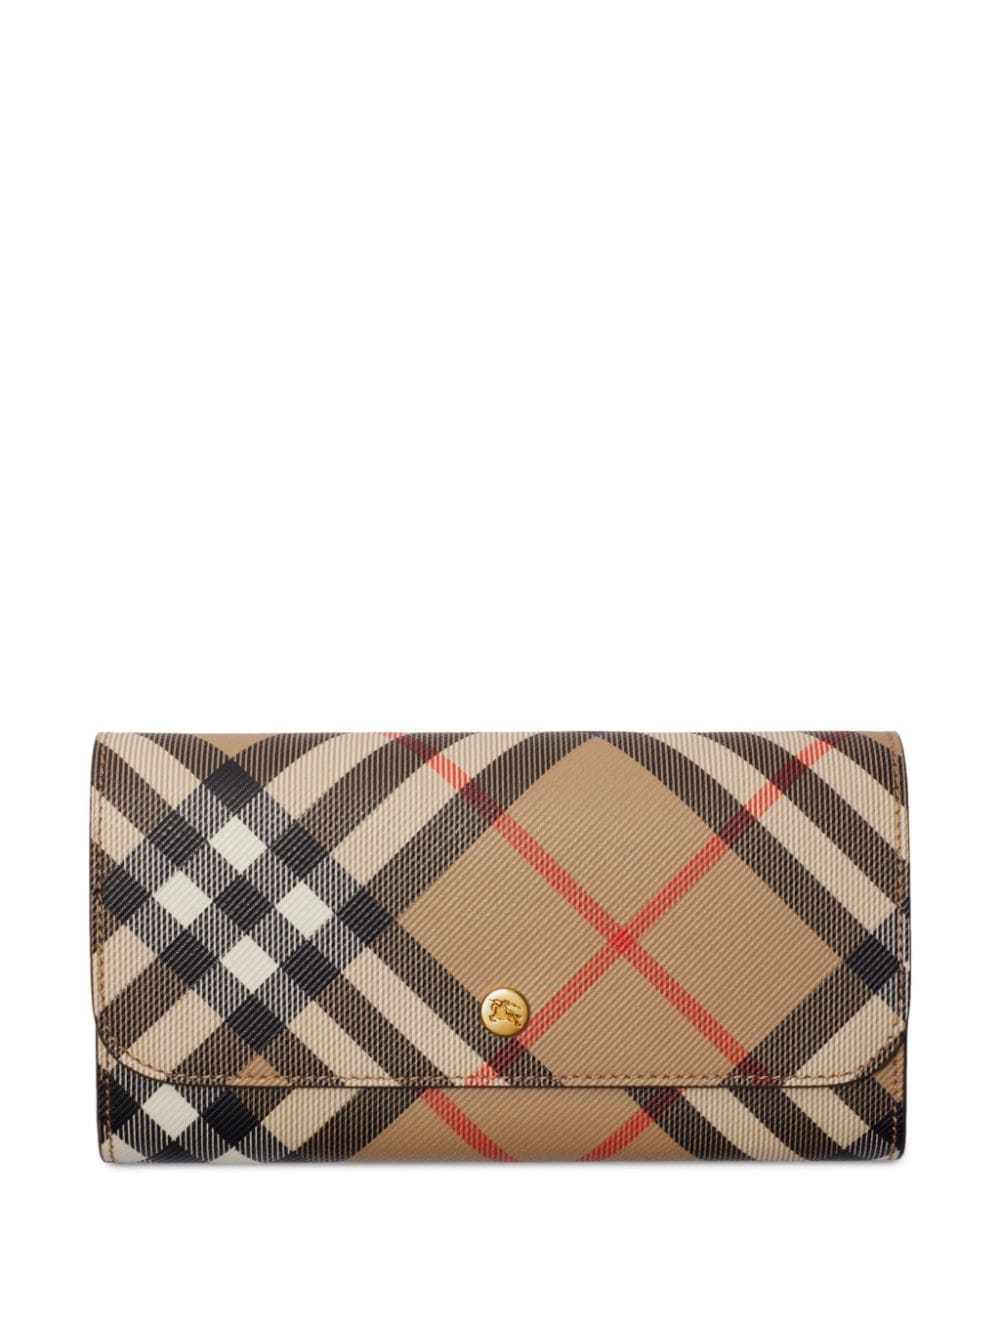 Burberry check wallet